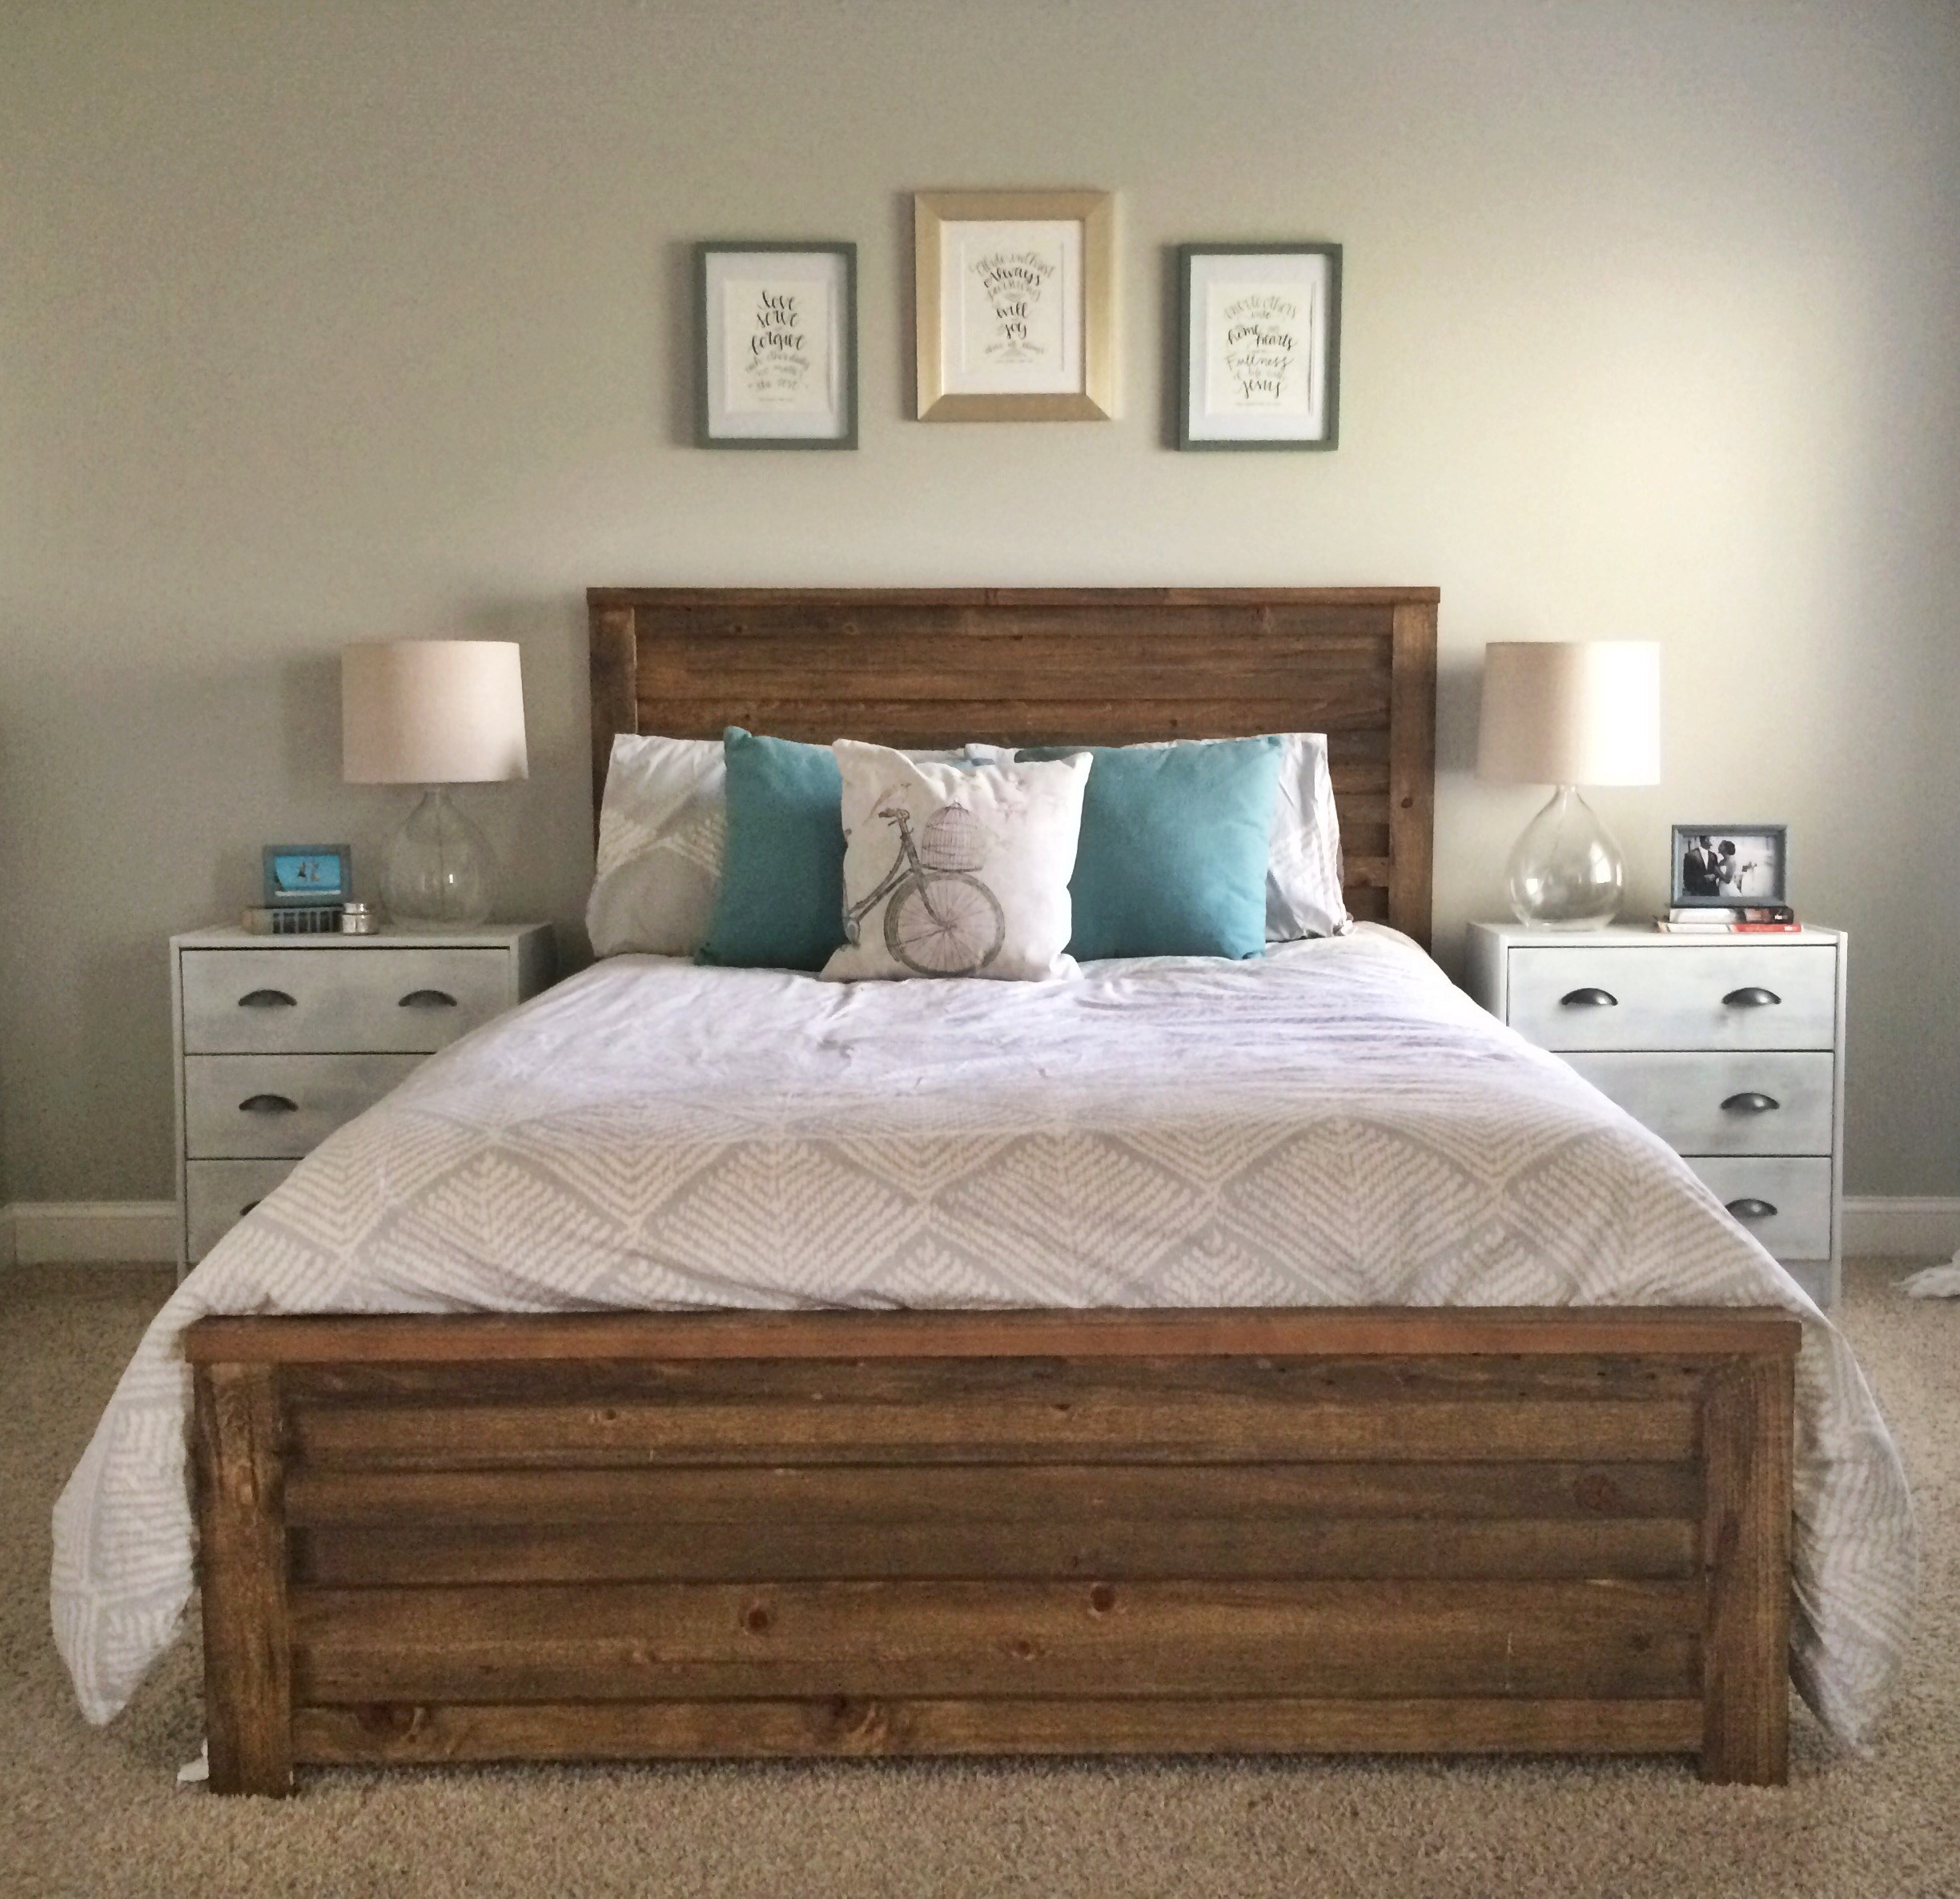 Ways To Find Quality Furniture For Cheap Bedroom Set